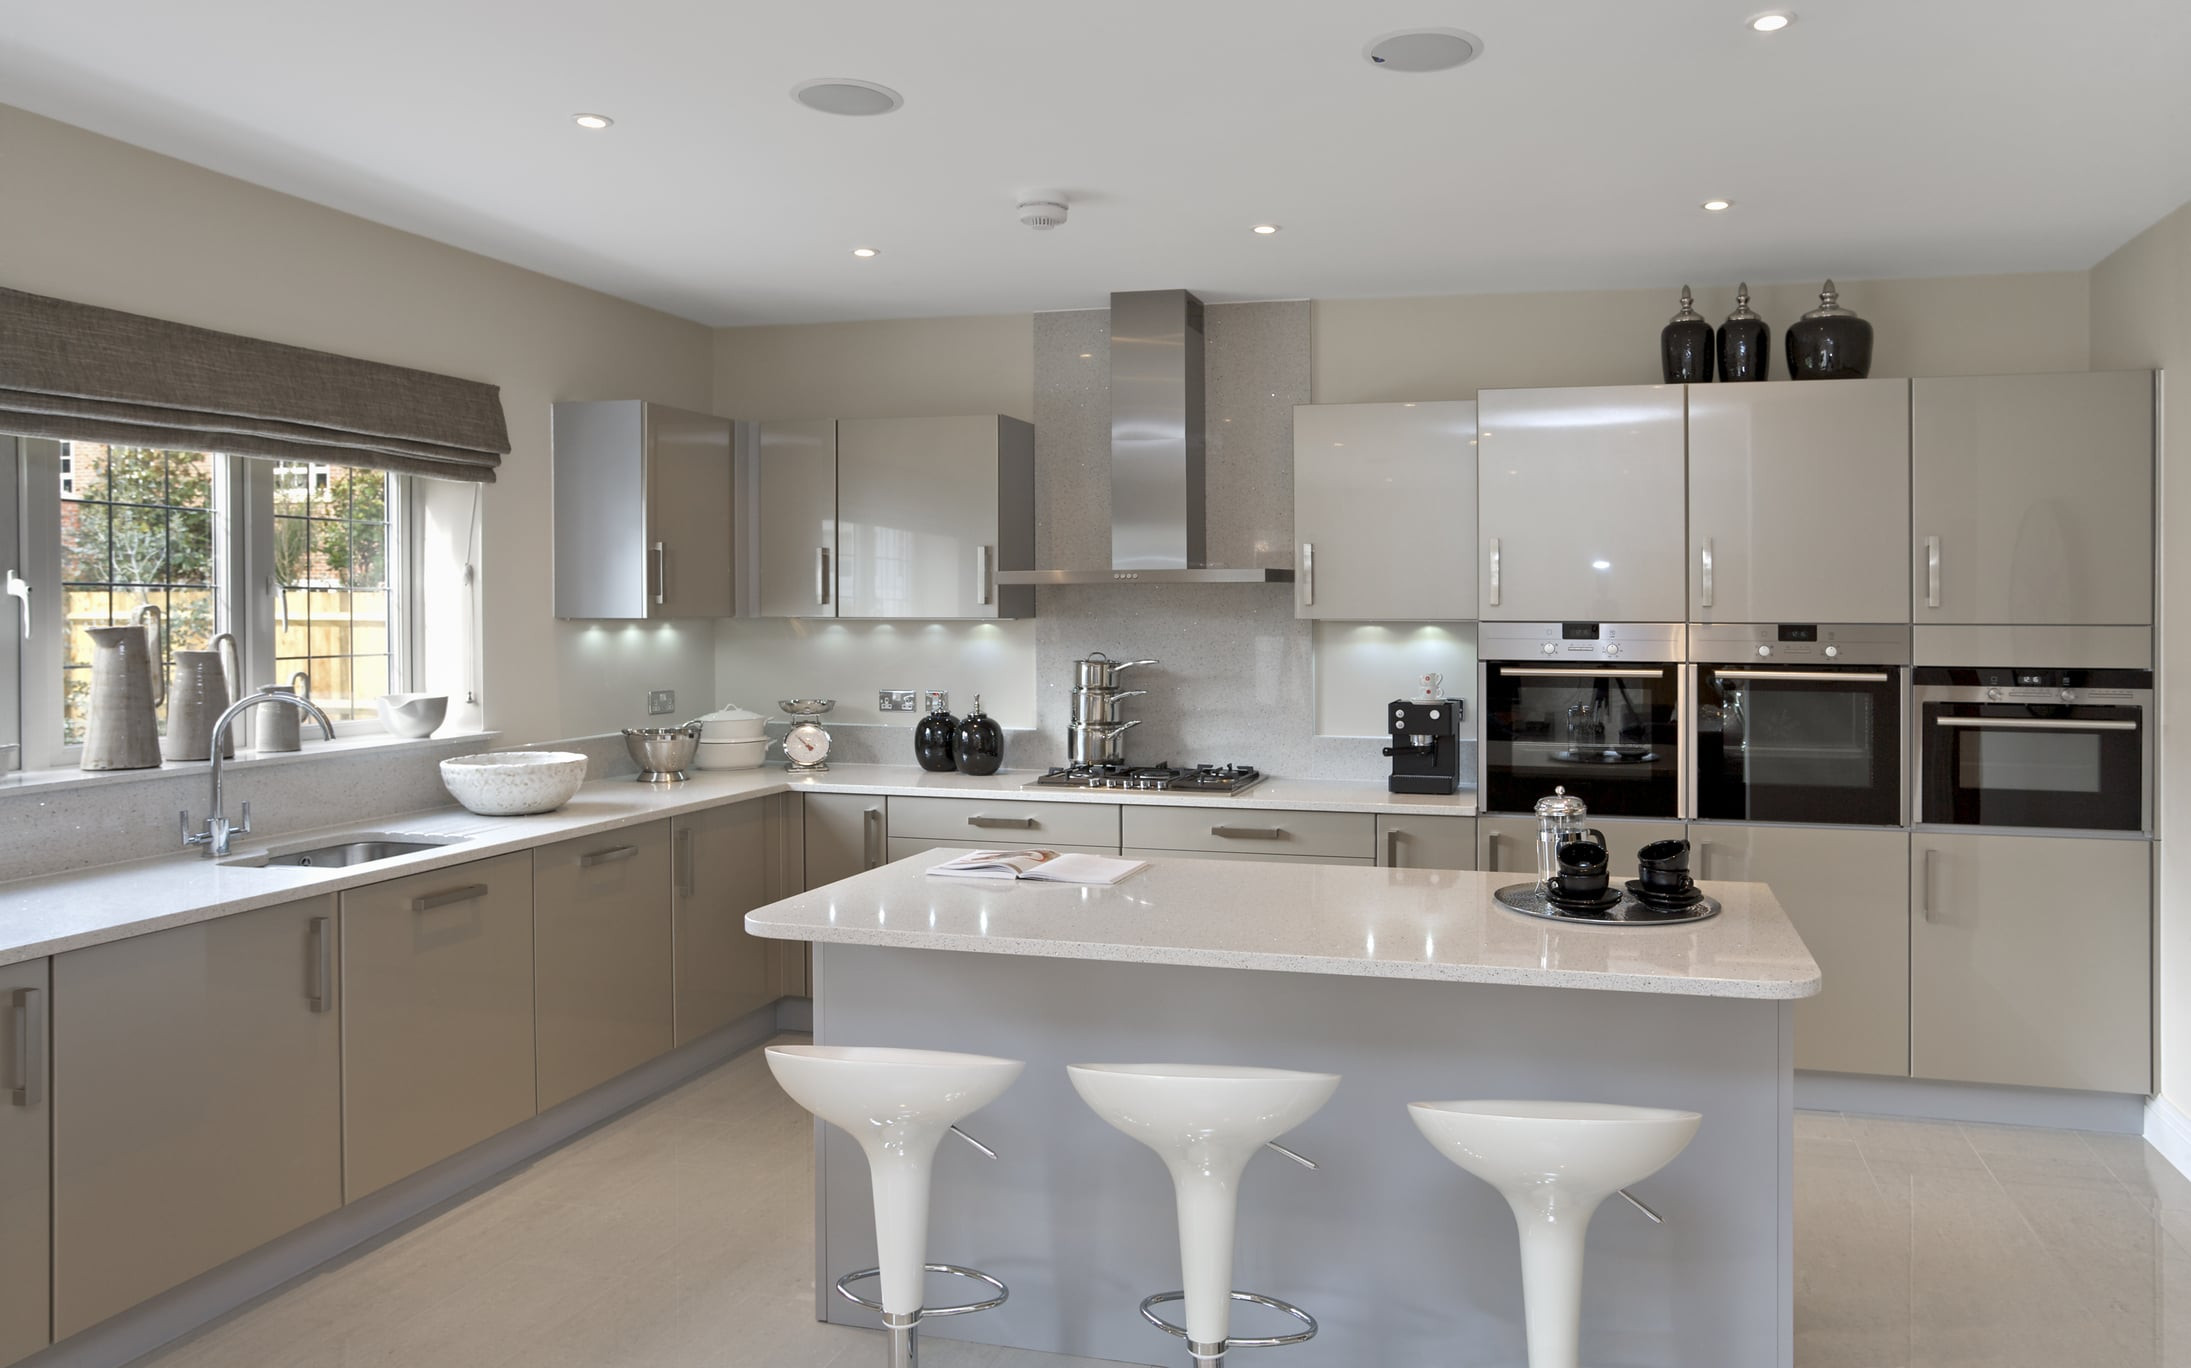 Modern Vs Traditional Kitchen: Which is the right style for you?